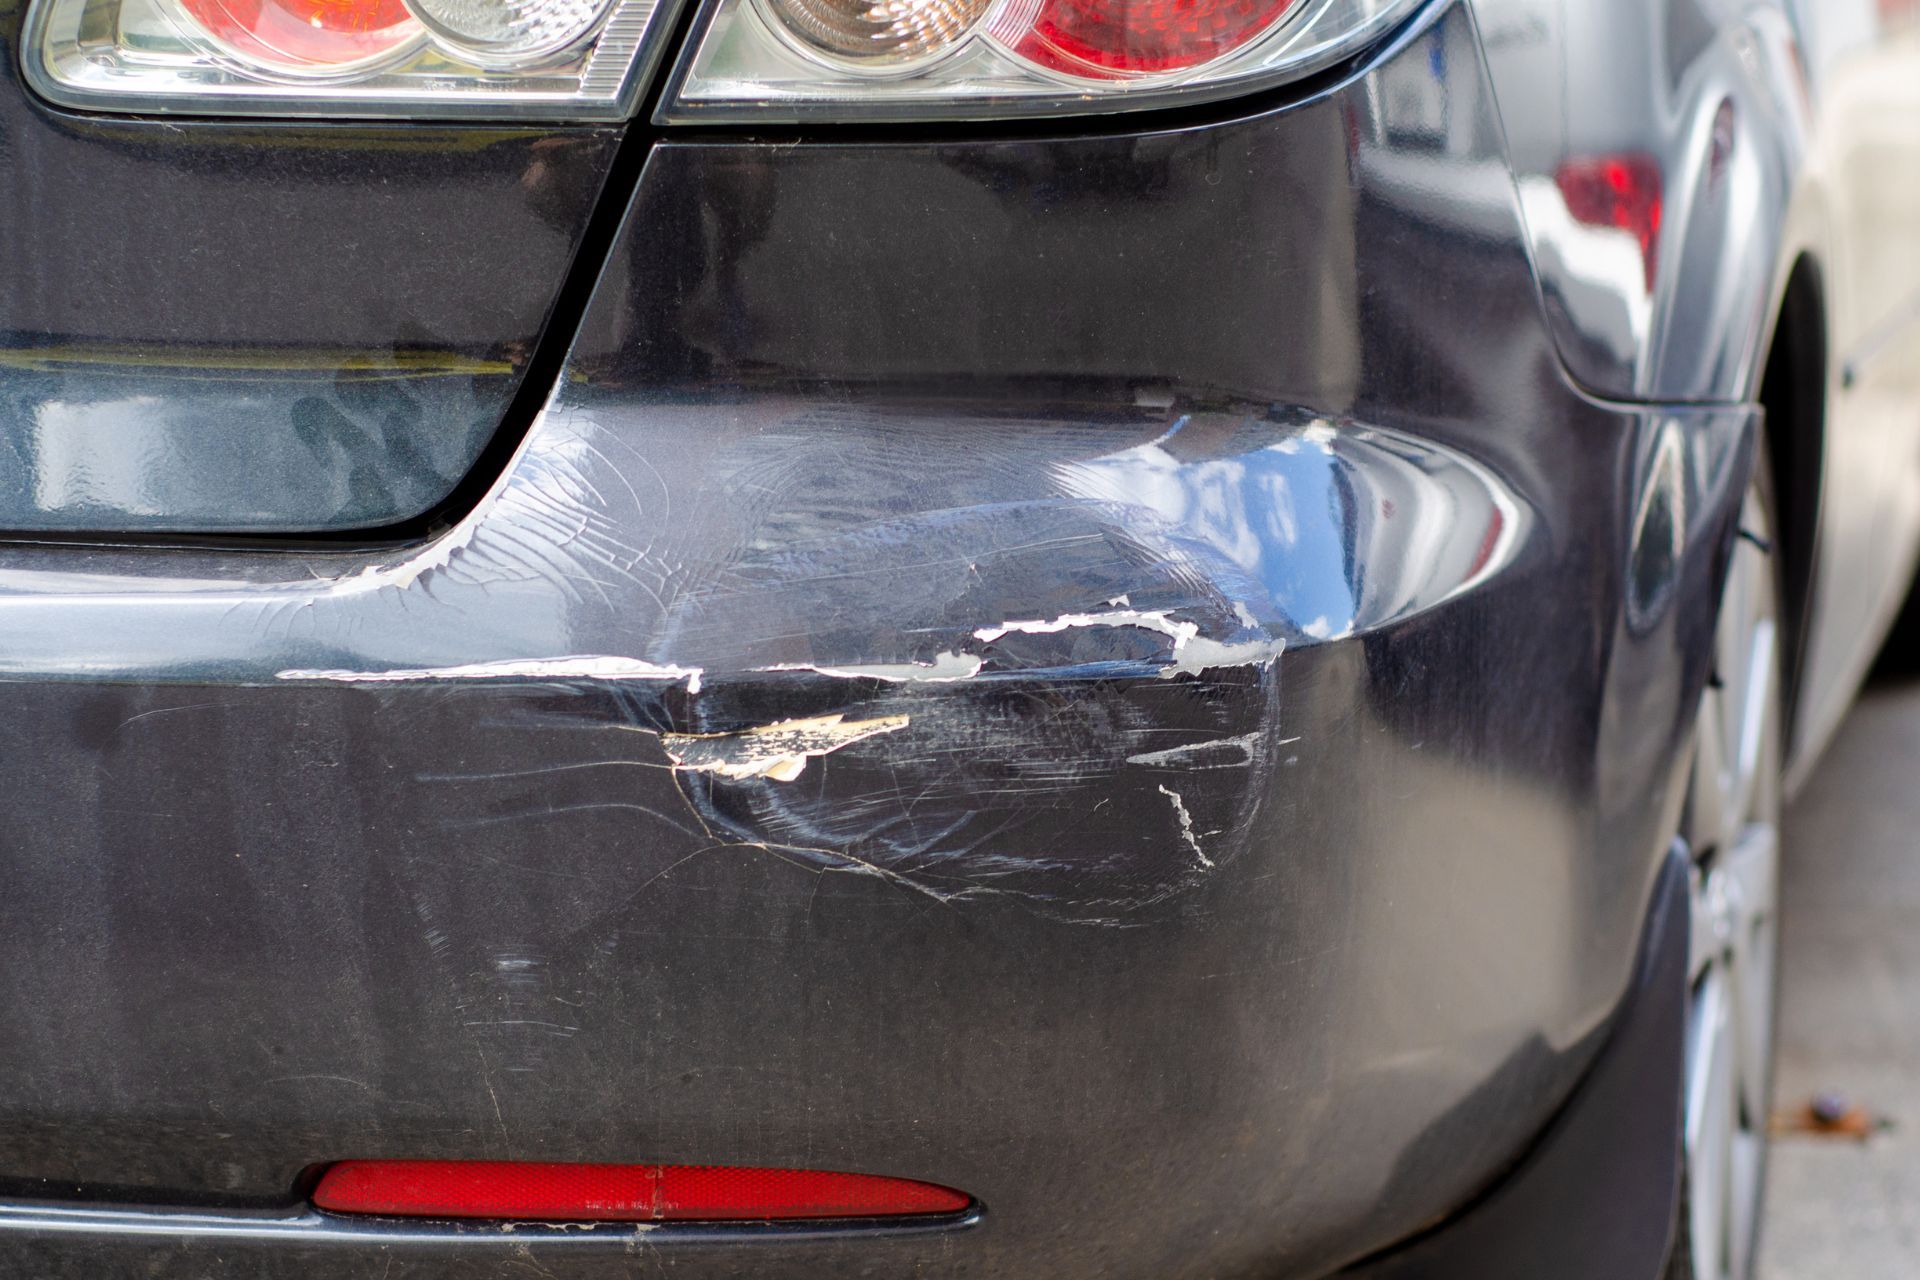 Should You Replace or Repair Your Bumper? Here’s How To Tell